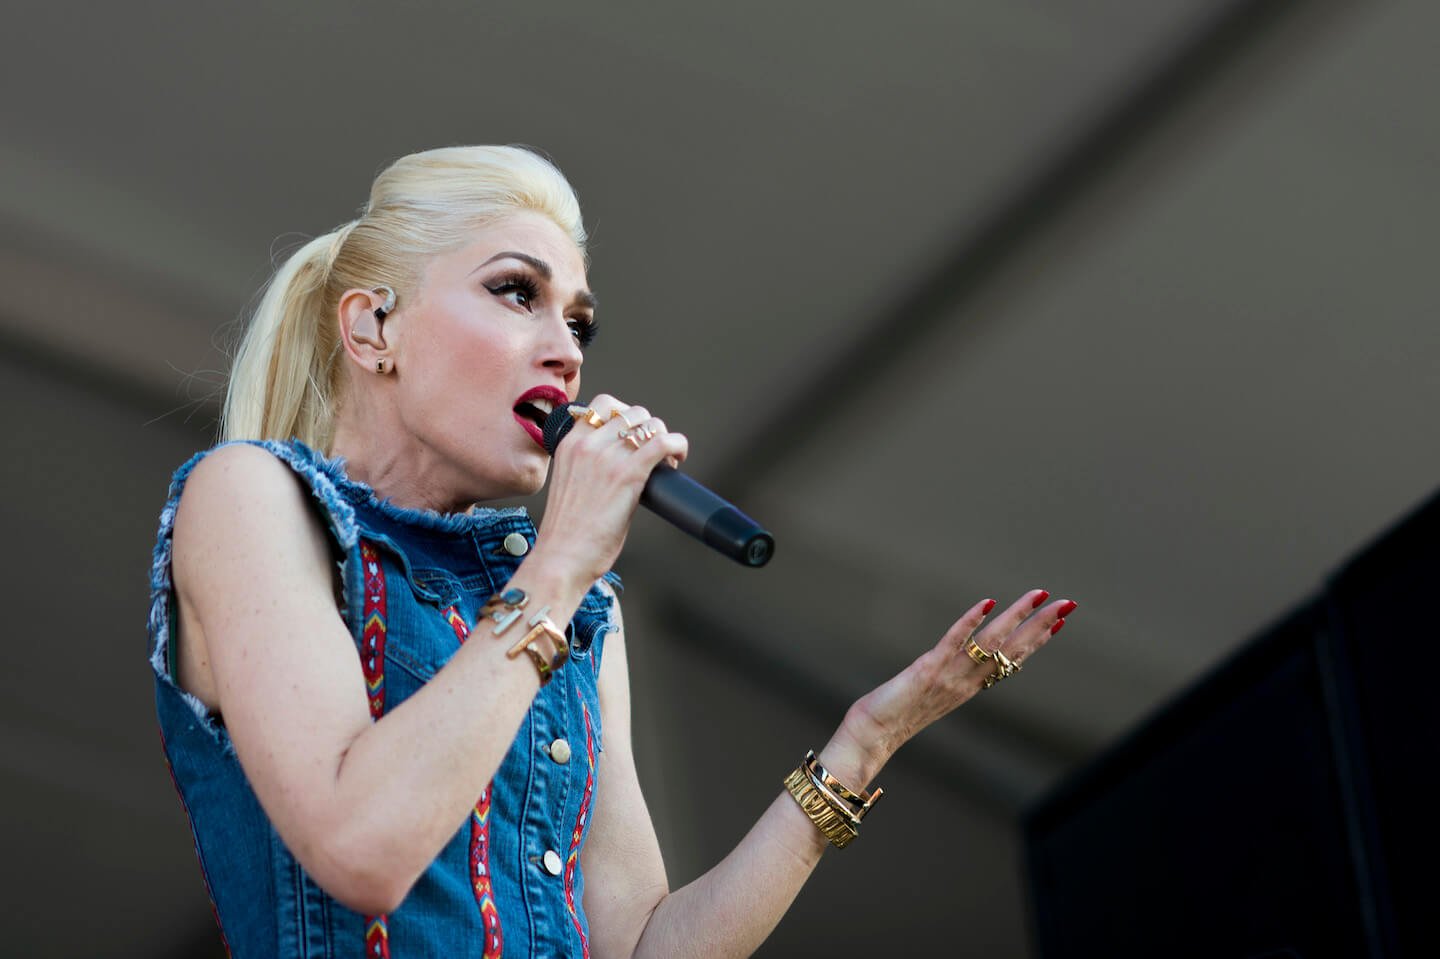 Gwen Stefani holding a microphone and singing on stage with No Doubt